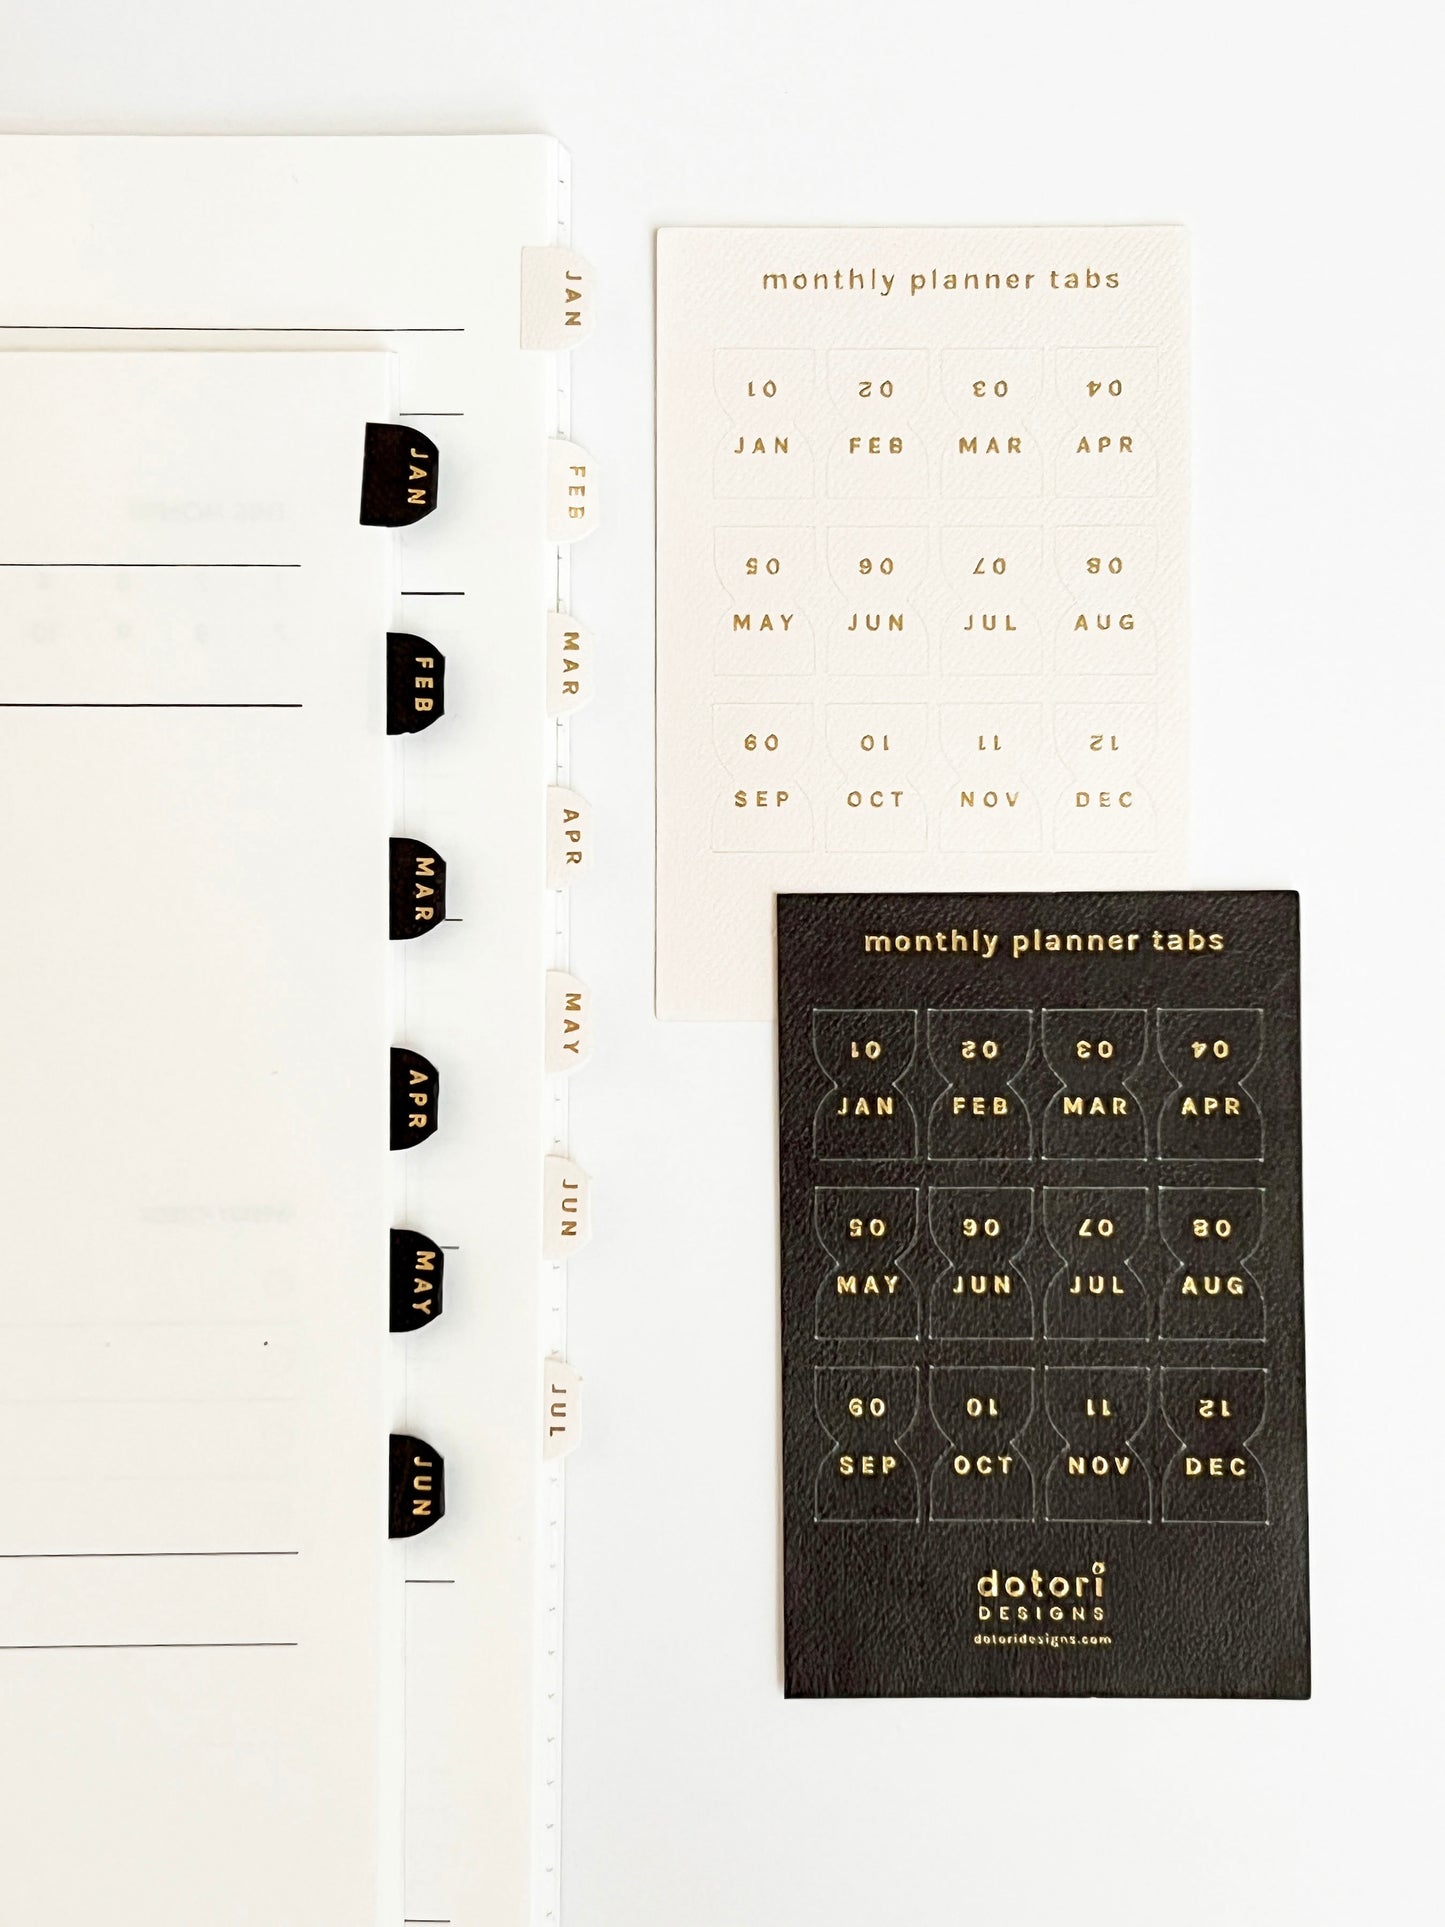 Textured Planner Monthly Tabs with Gold Foil Lettering